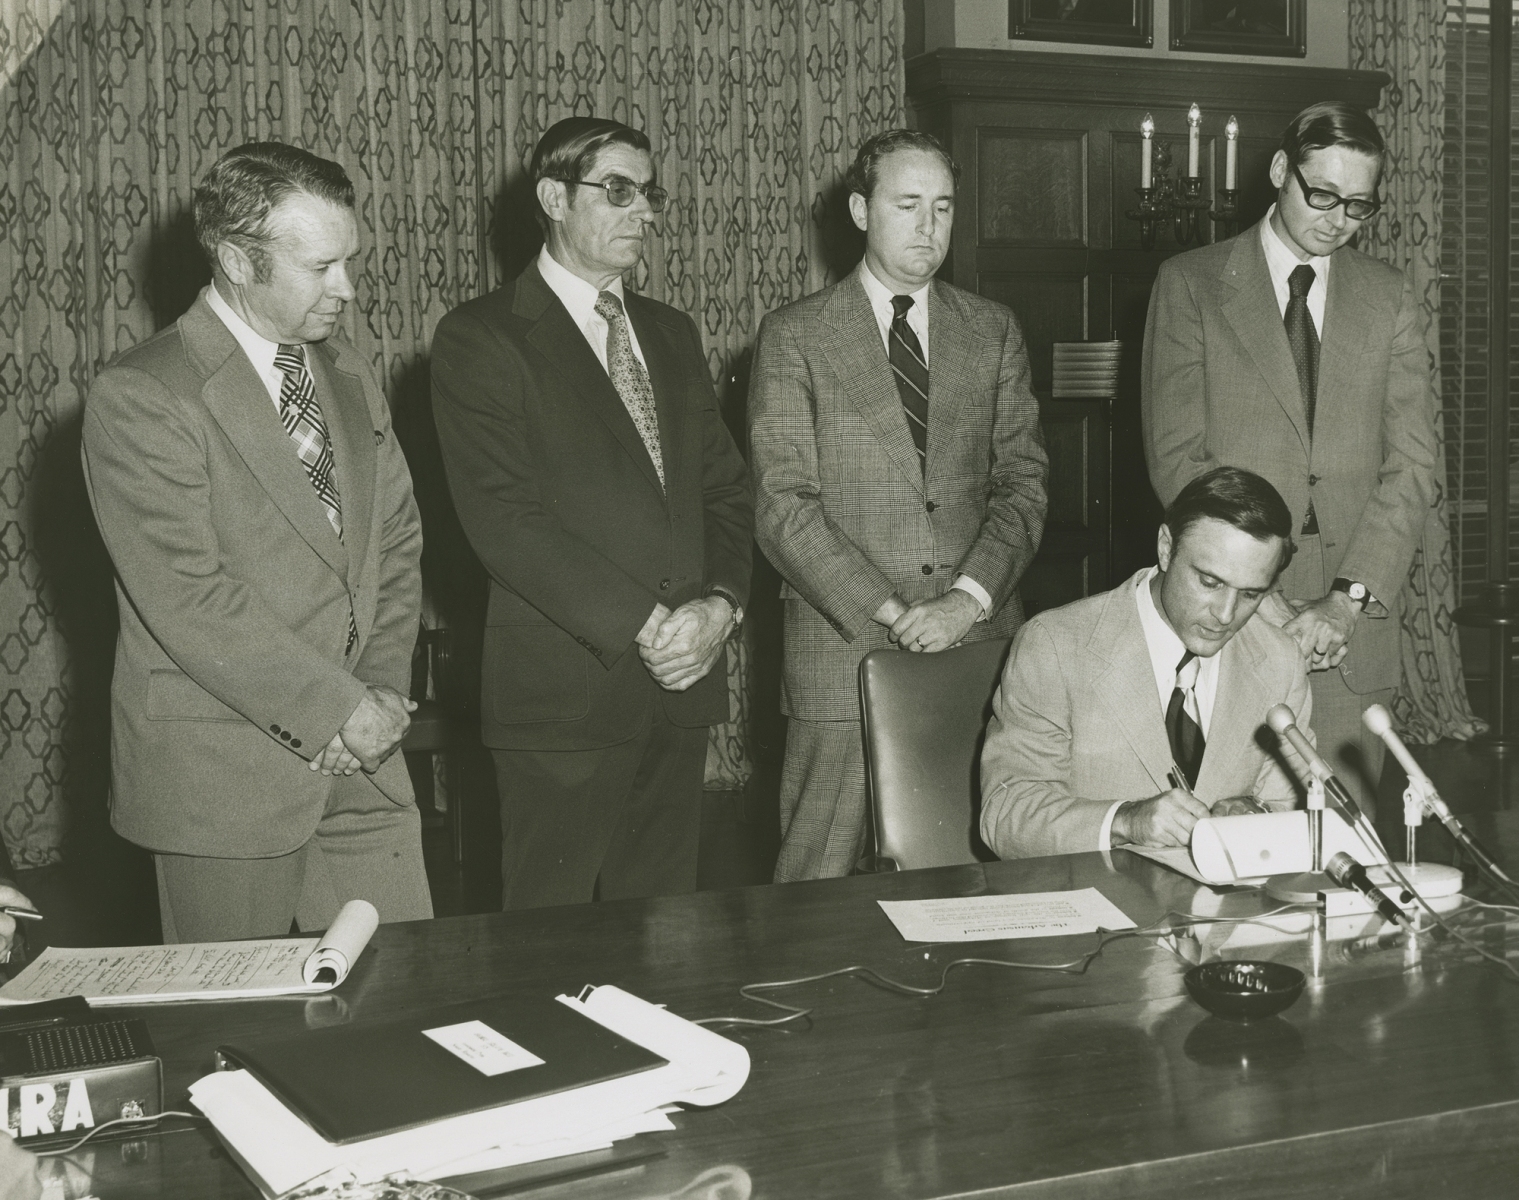 Photograph of Charles Moore, Lacy Landers, Joe Ford, Cal Ledbetter, and Governor David Pryor, at the signing of the bill calling for a constitutional convention, ca. 1975